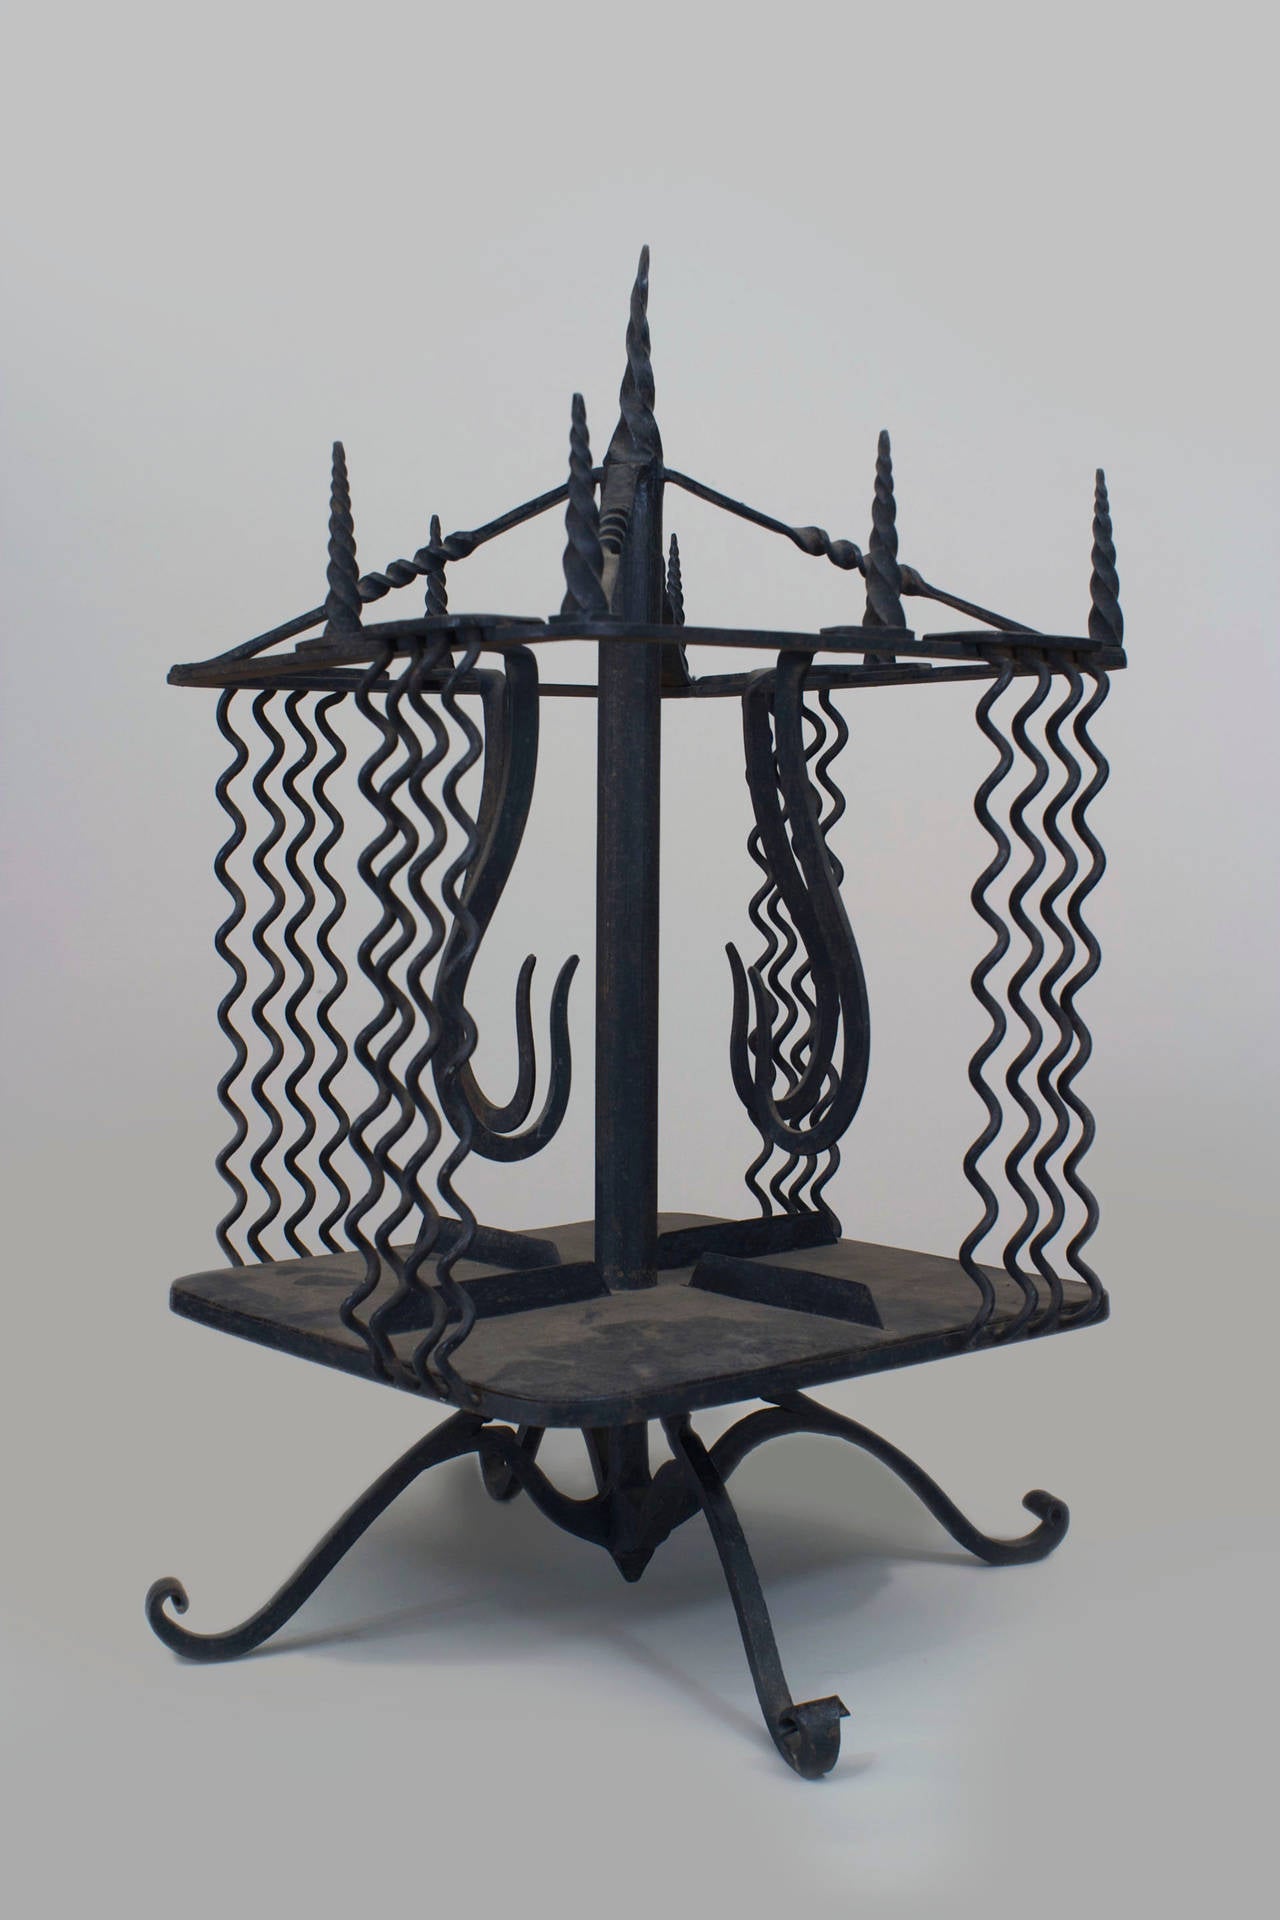 Italian Renaissance-style (19th/20th Century) wrought iron revolving table top book stand with finials on top and wavy design sides on a base with 4 scroll feet
